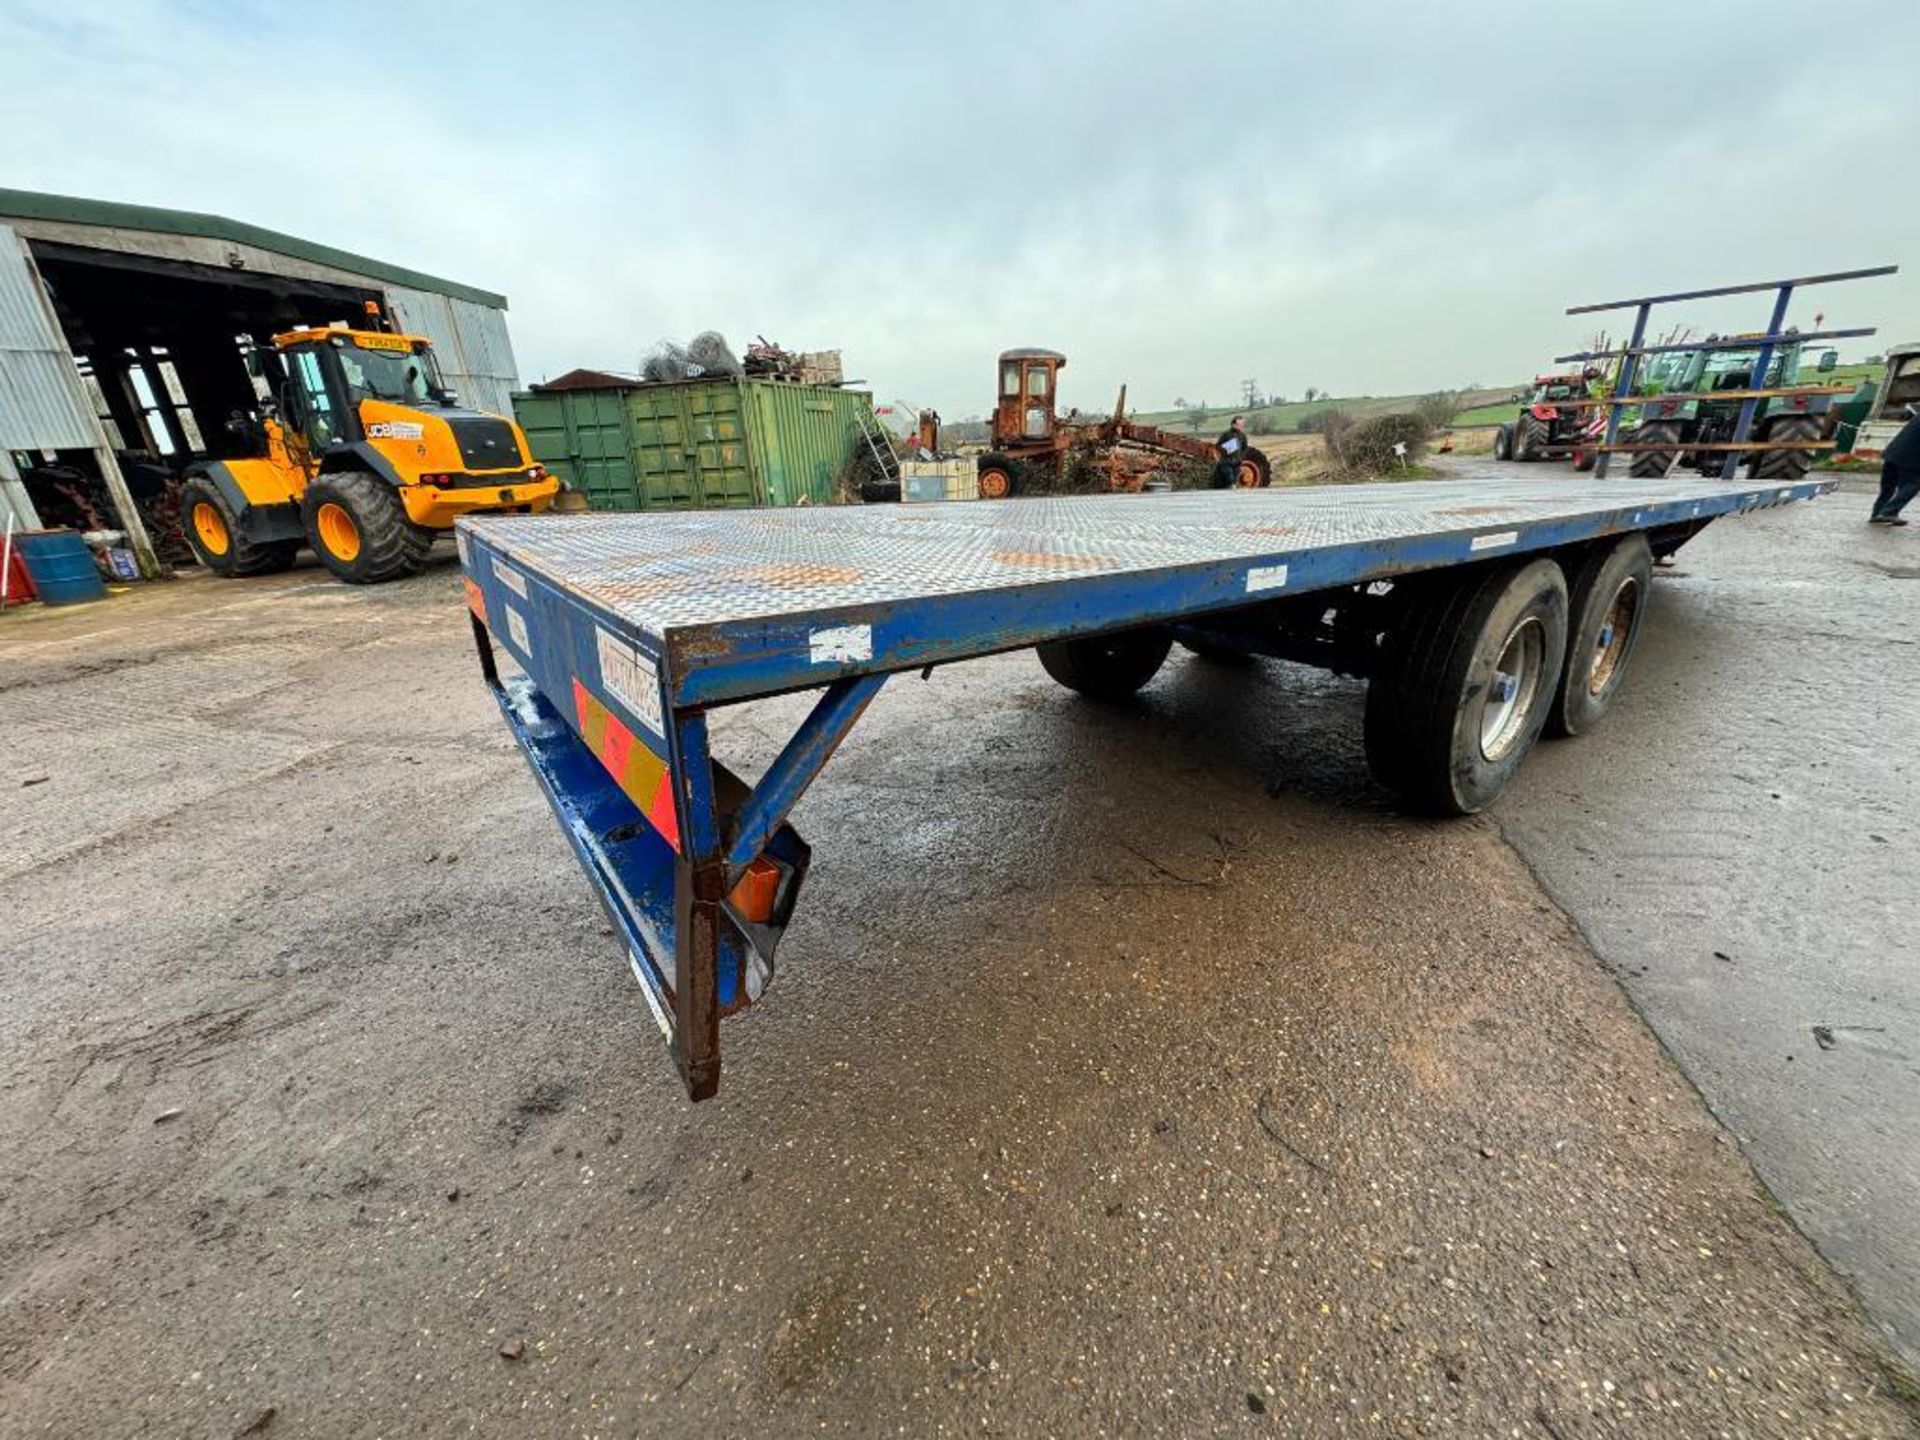 Philip Watkins 32ft twin axle flat bed trailer with metal floor, front bale rave, sprung drawbar and - Image 4 of 11